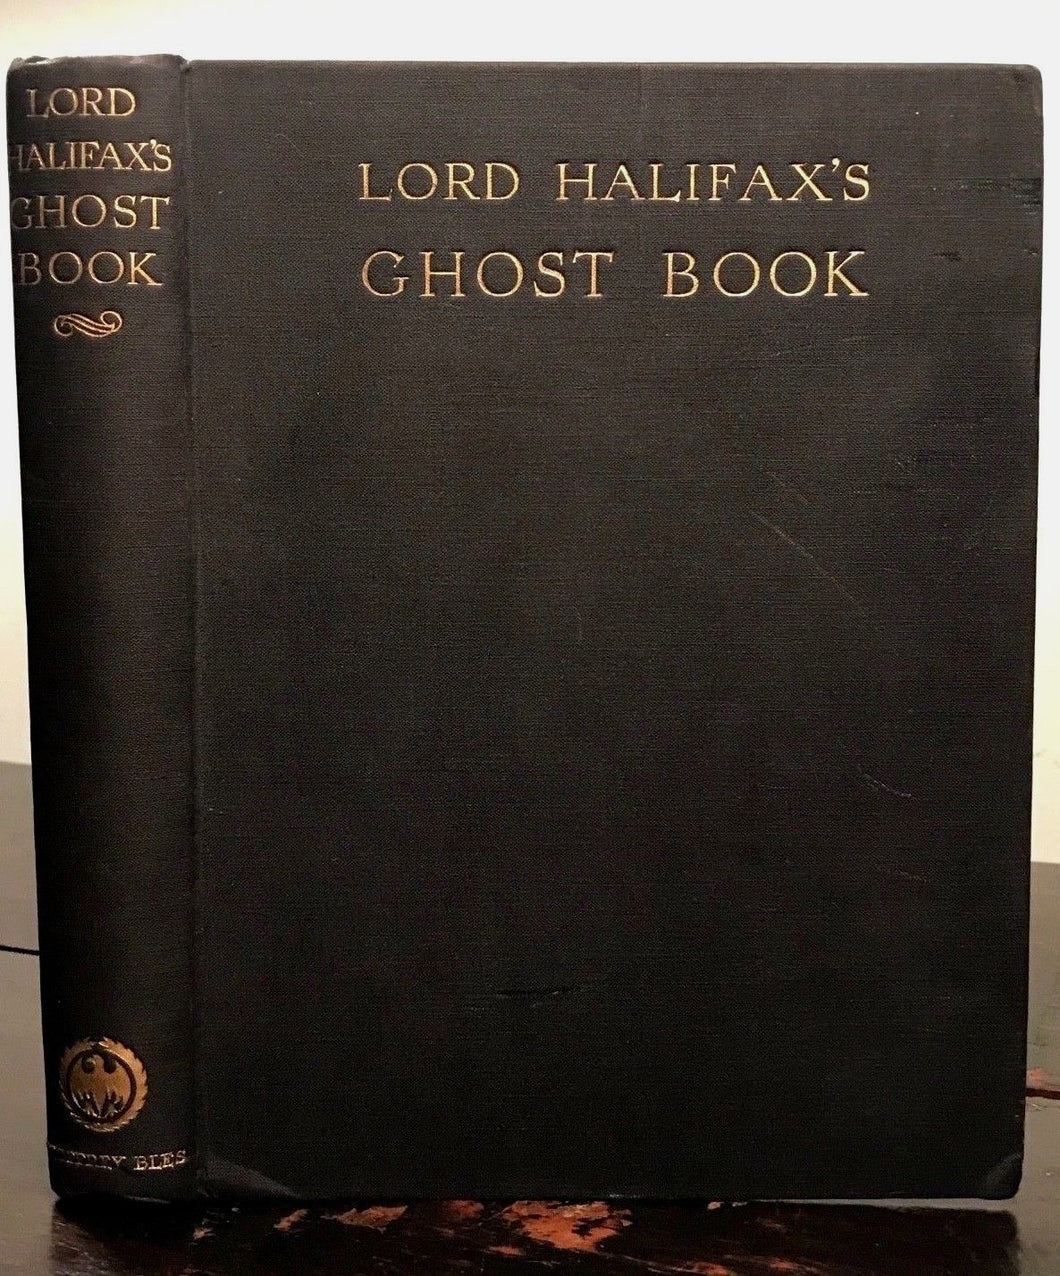 LORD HALIFAX'S GHOST BOOK: Stories of Haunted Houses, Apparitions - 1936, GHOSTS